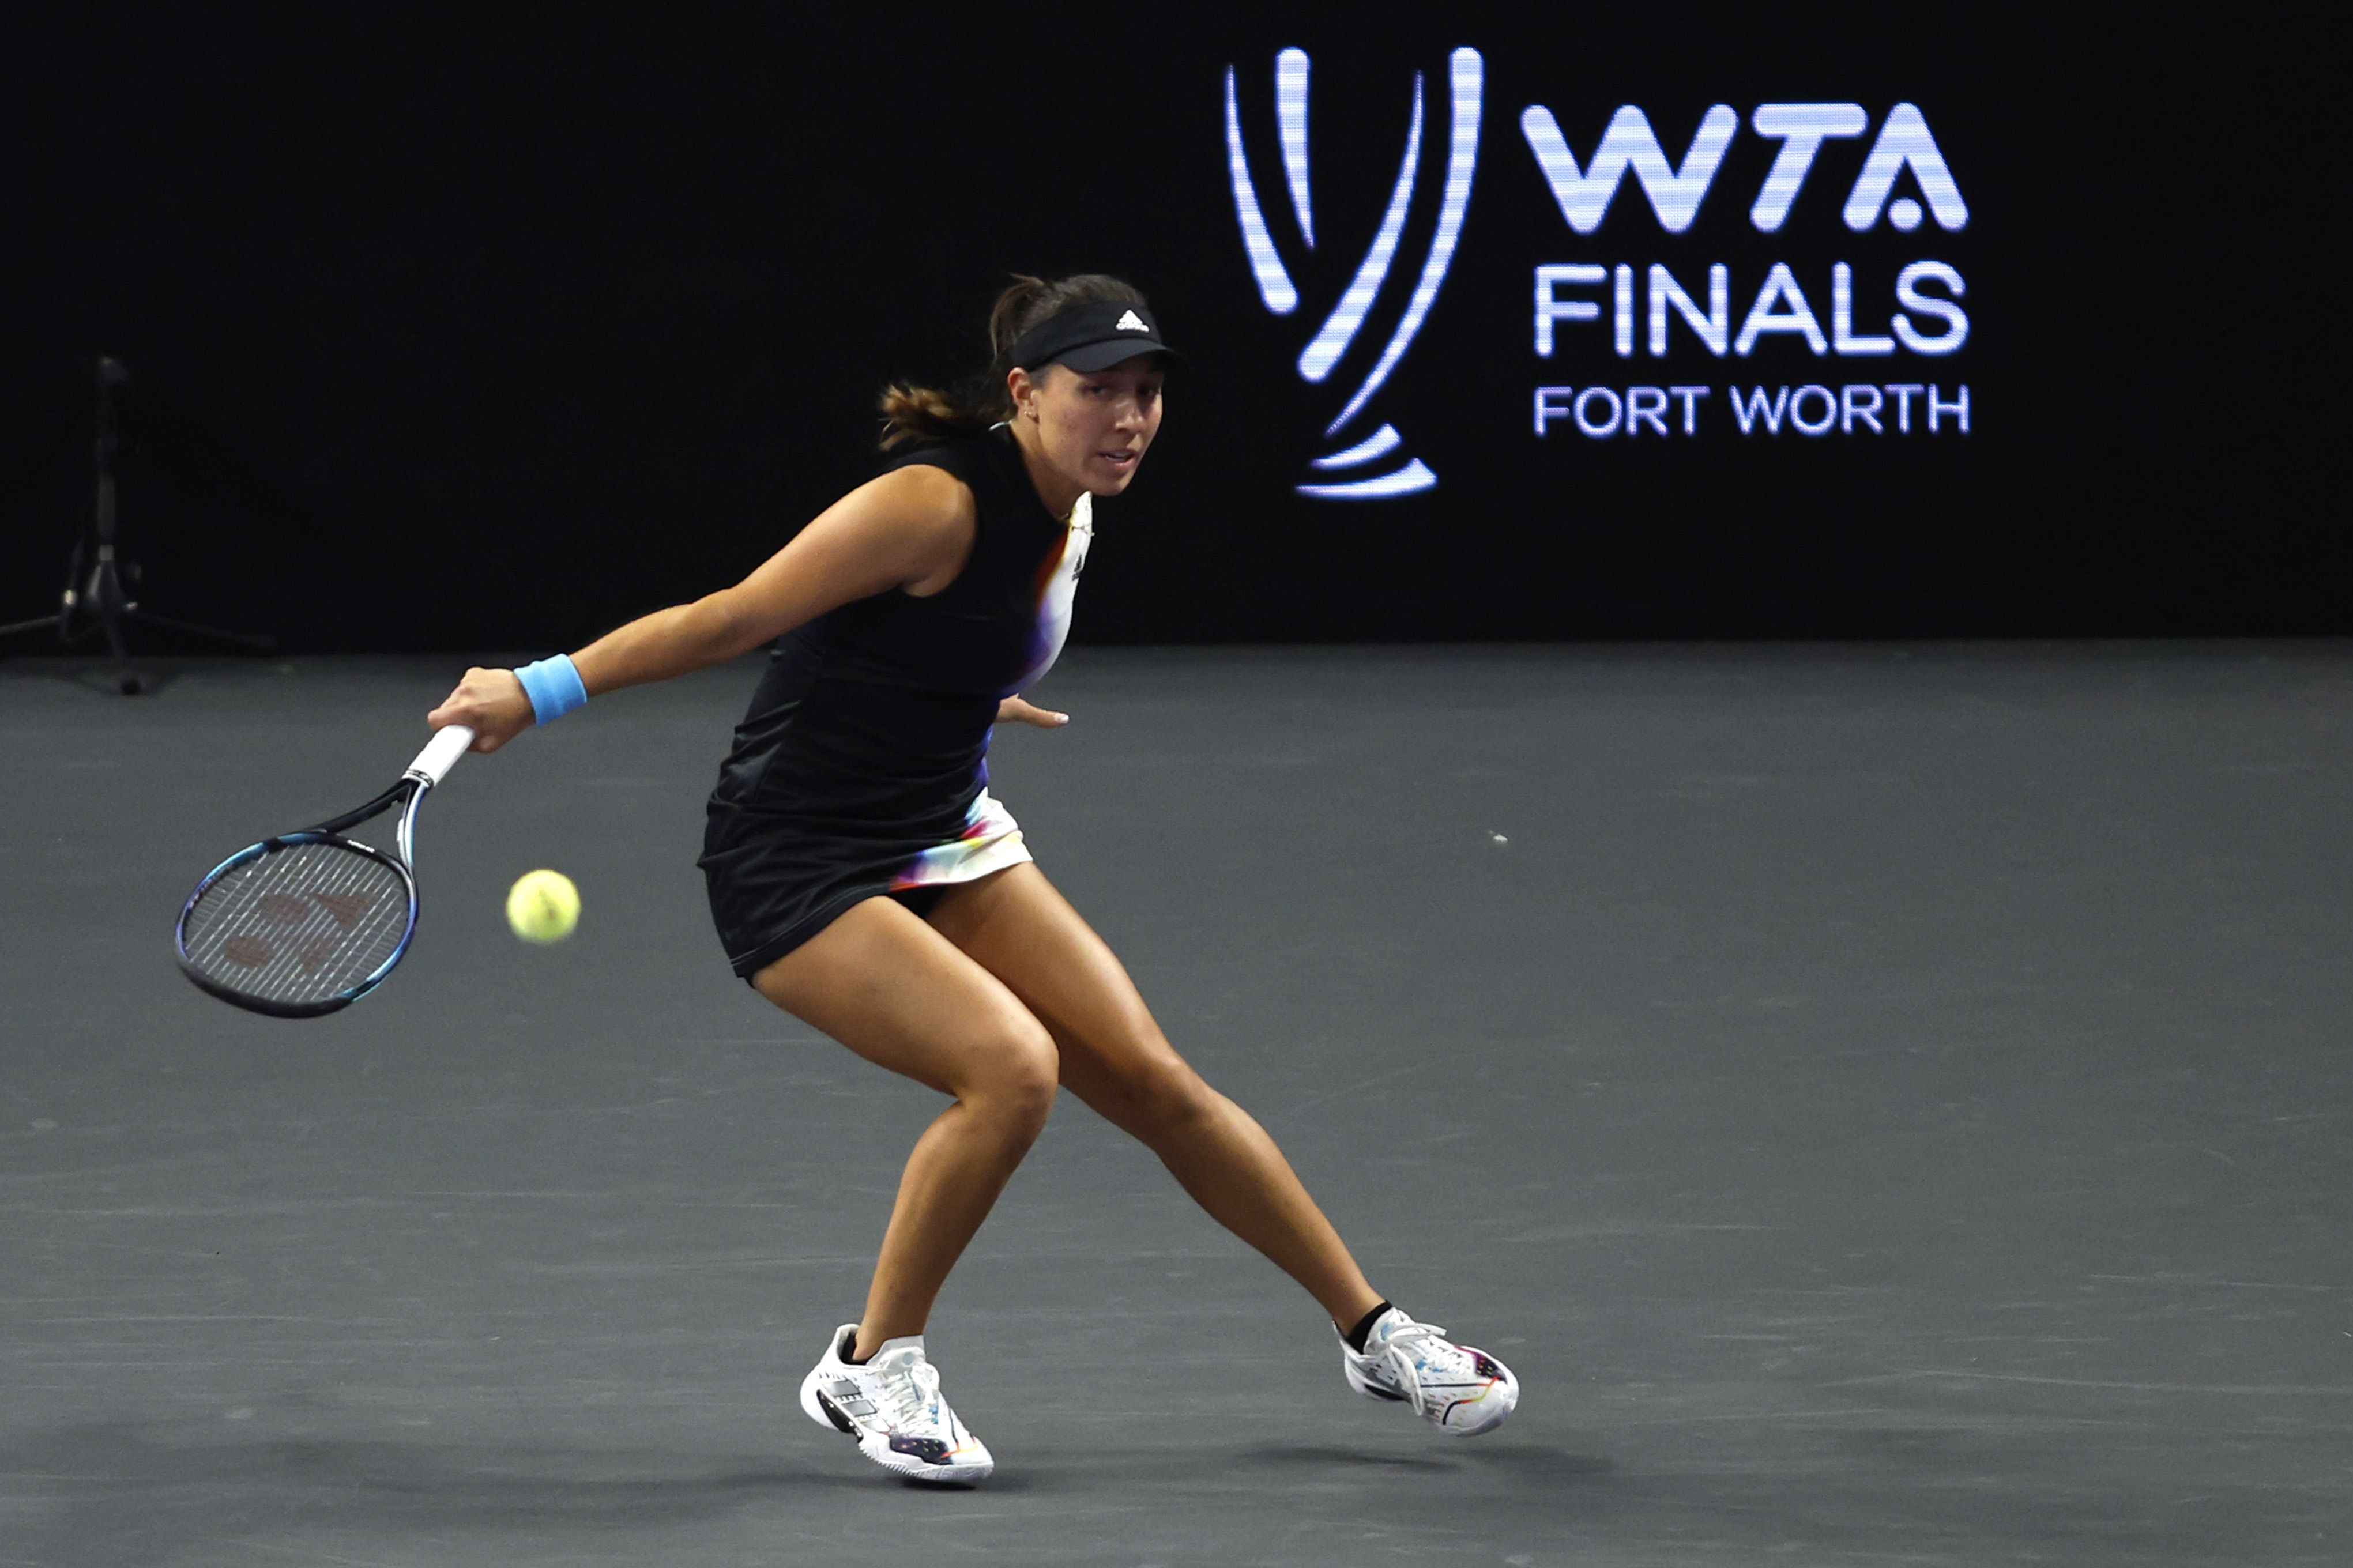 Cancun, Mexico, will host the WTA Finals right before the Billie Jean